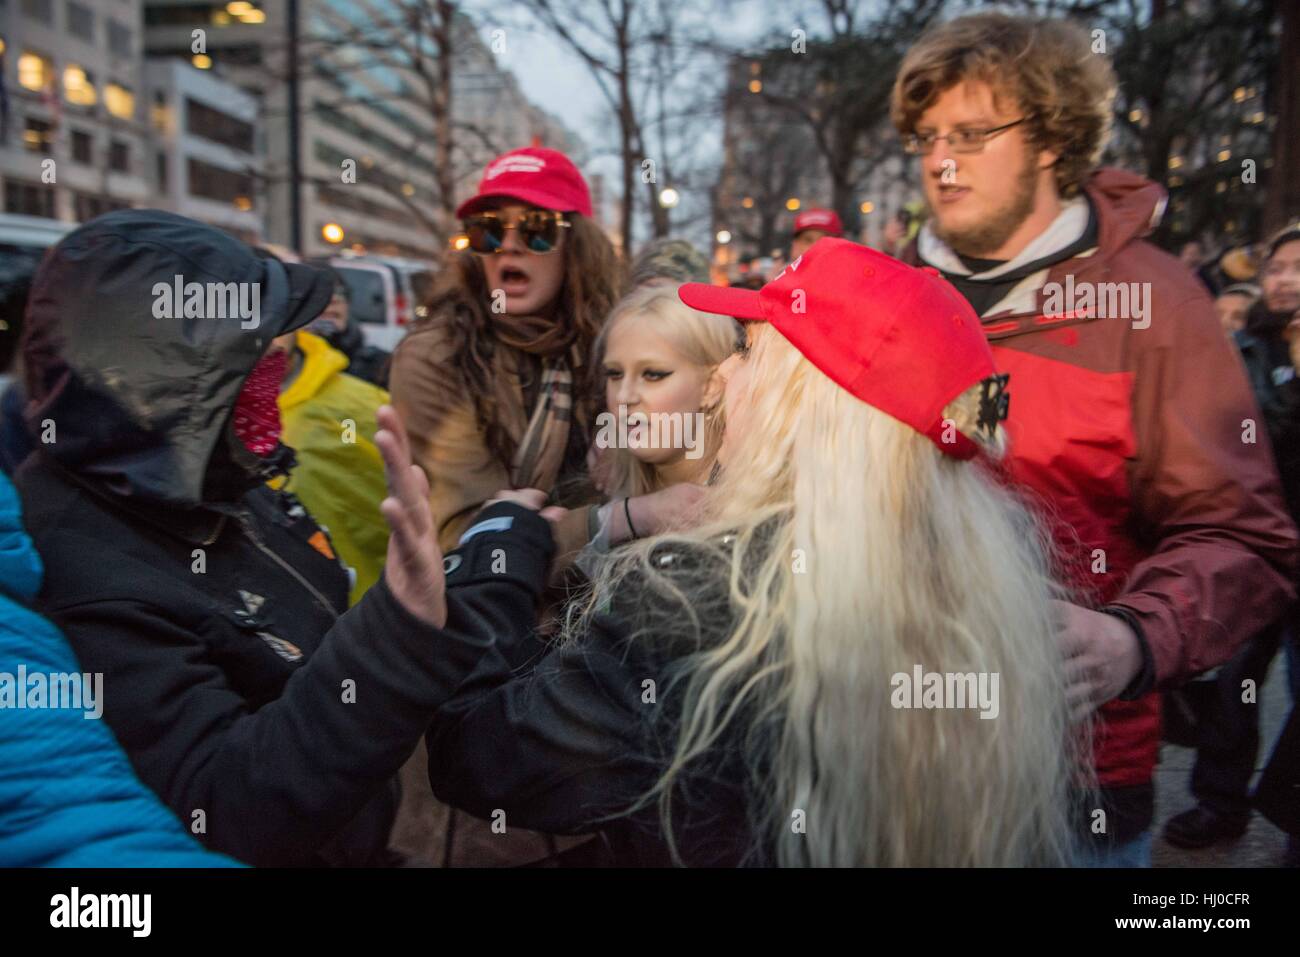 Protestors and supporters clash at the inauguration of President Donald Trump in Washington, D.C. on January 20, 2017. Stock Photo